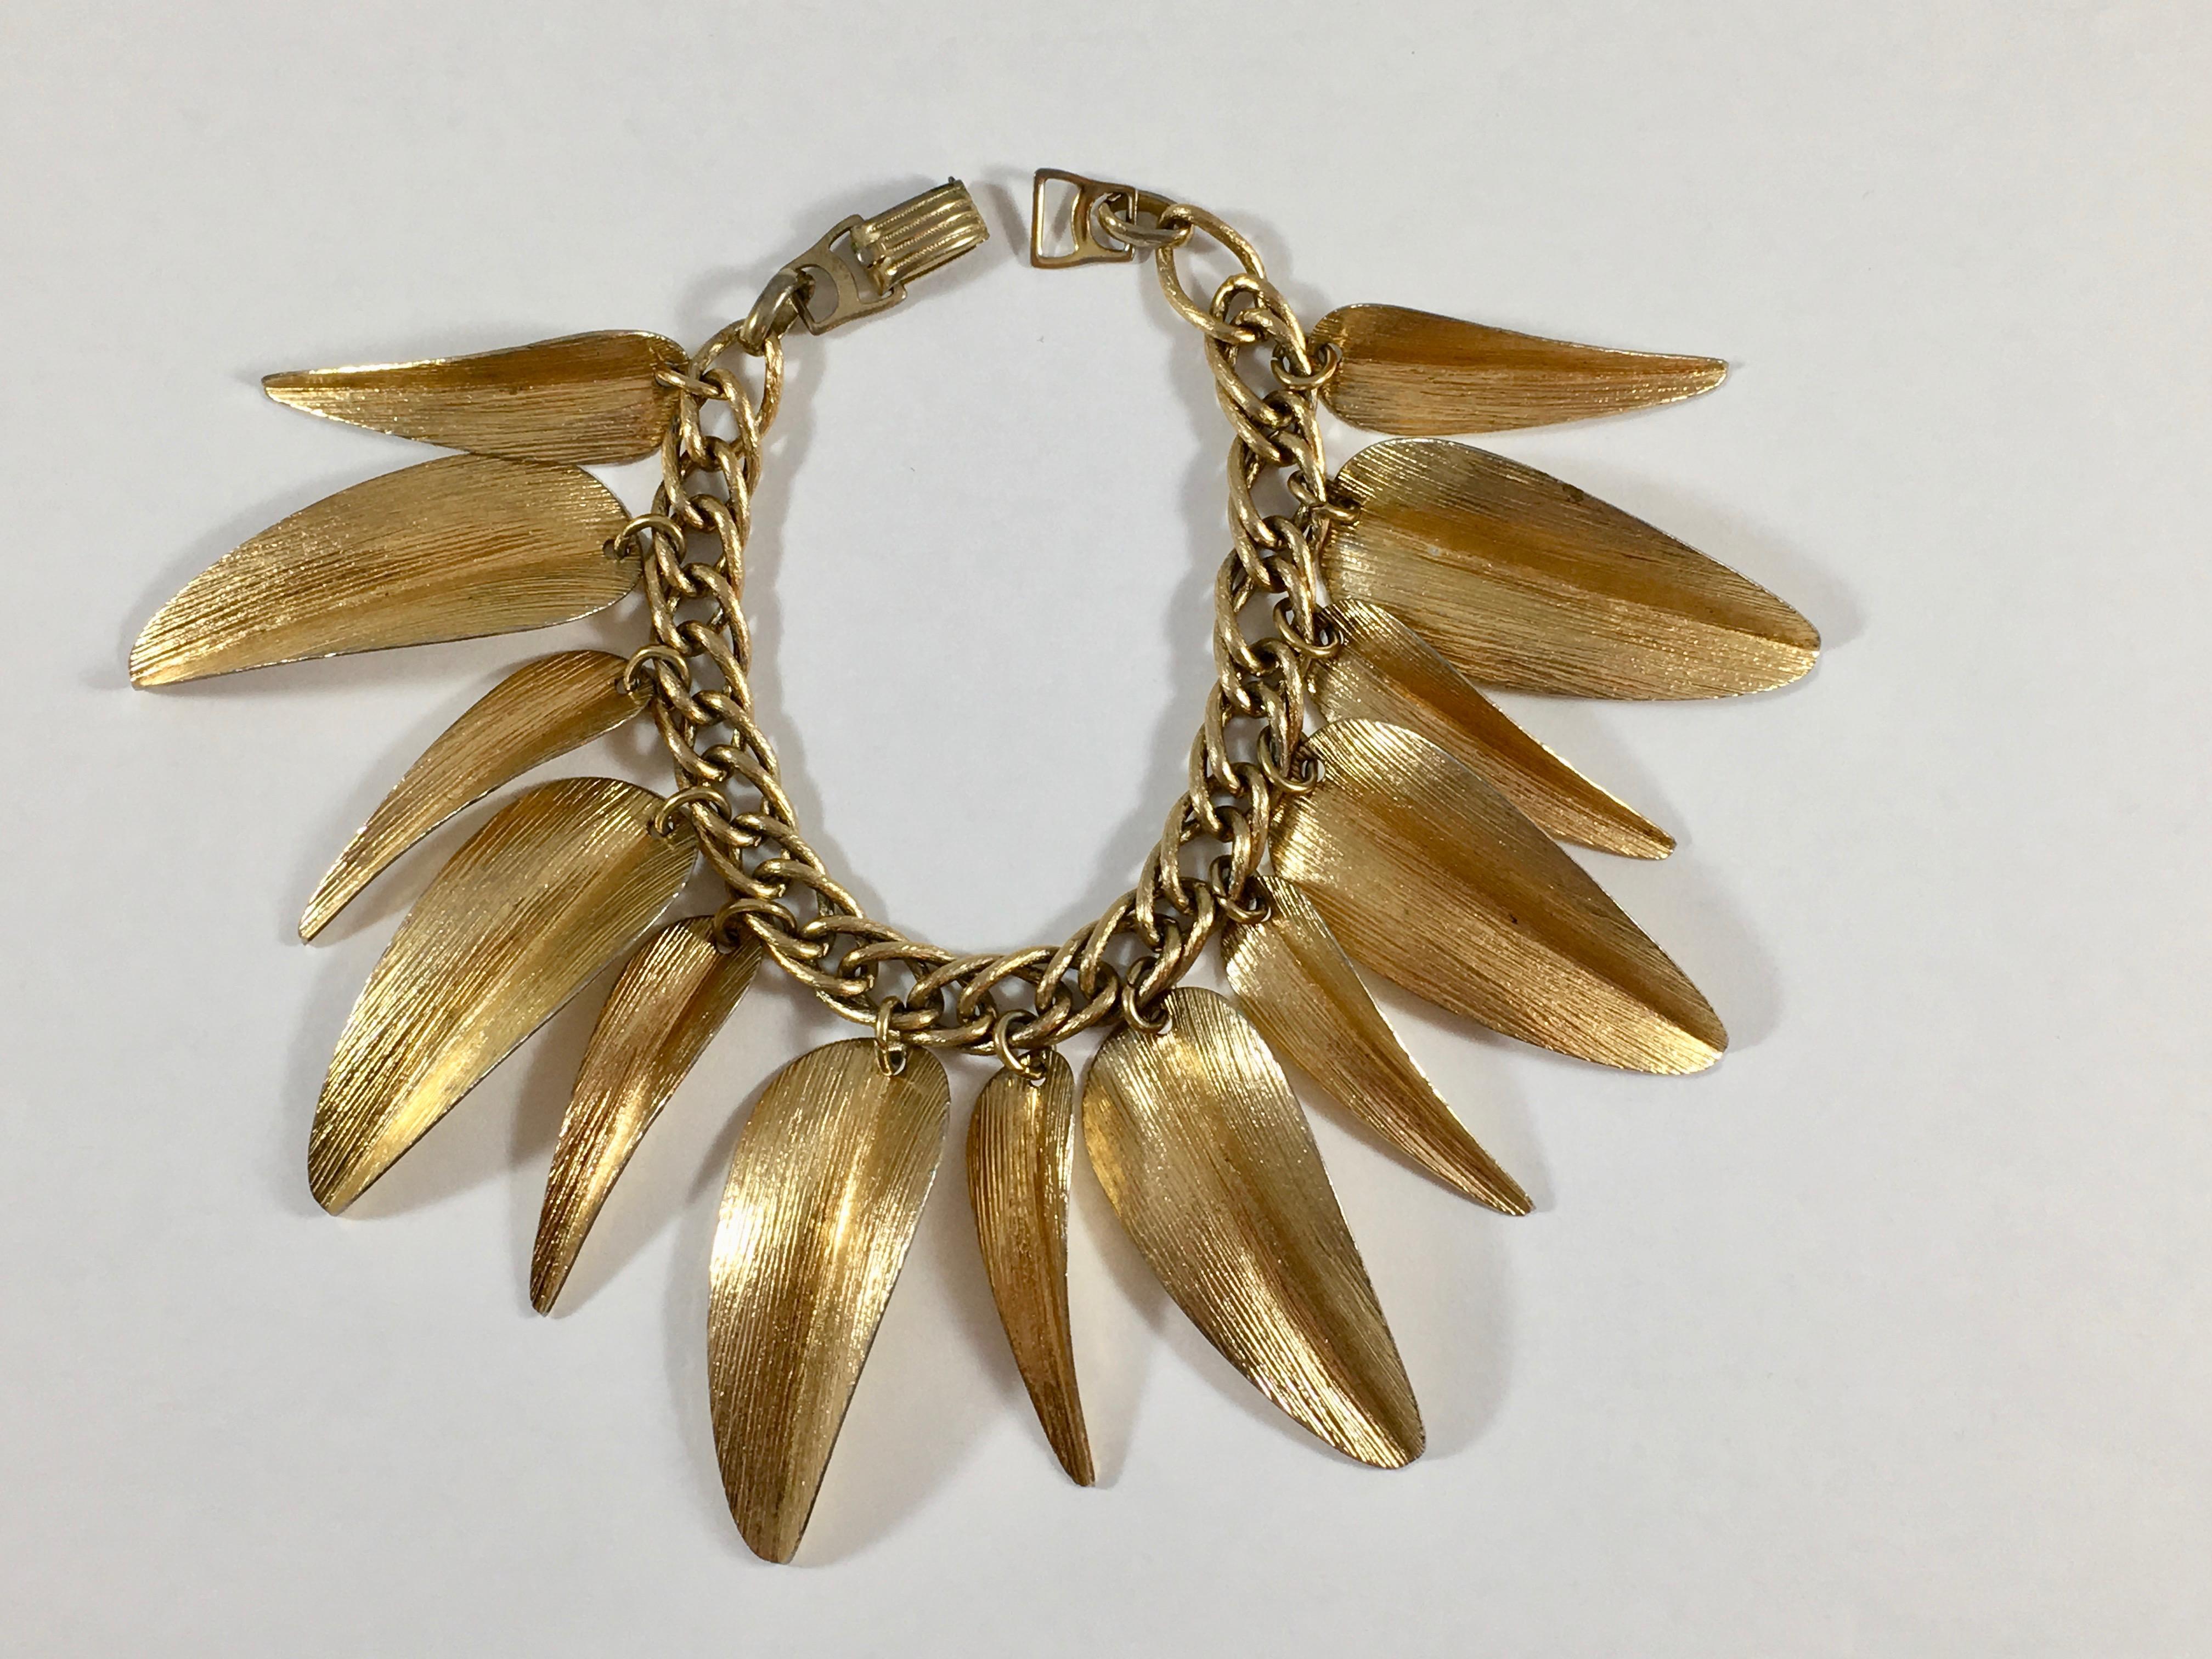 This is an amazing goldtone Napier leaf bracelet from Napier's 'Willow' collection designed in 1955 by Eugene Bertolli. The Willow necklace and bracelet set were presented to and worn by Miss America, Sharon Kay Ritchie in 1956 (see image #10). The